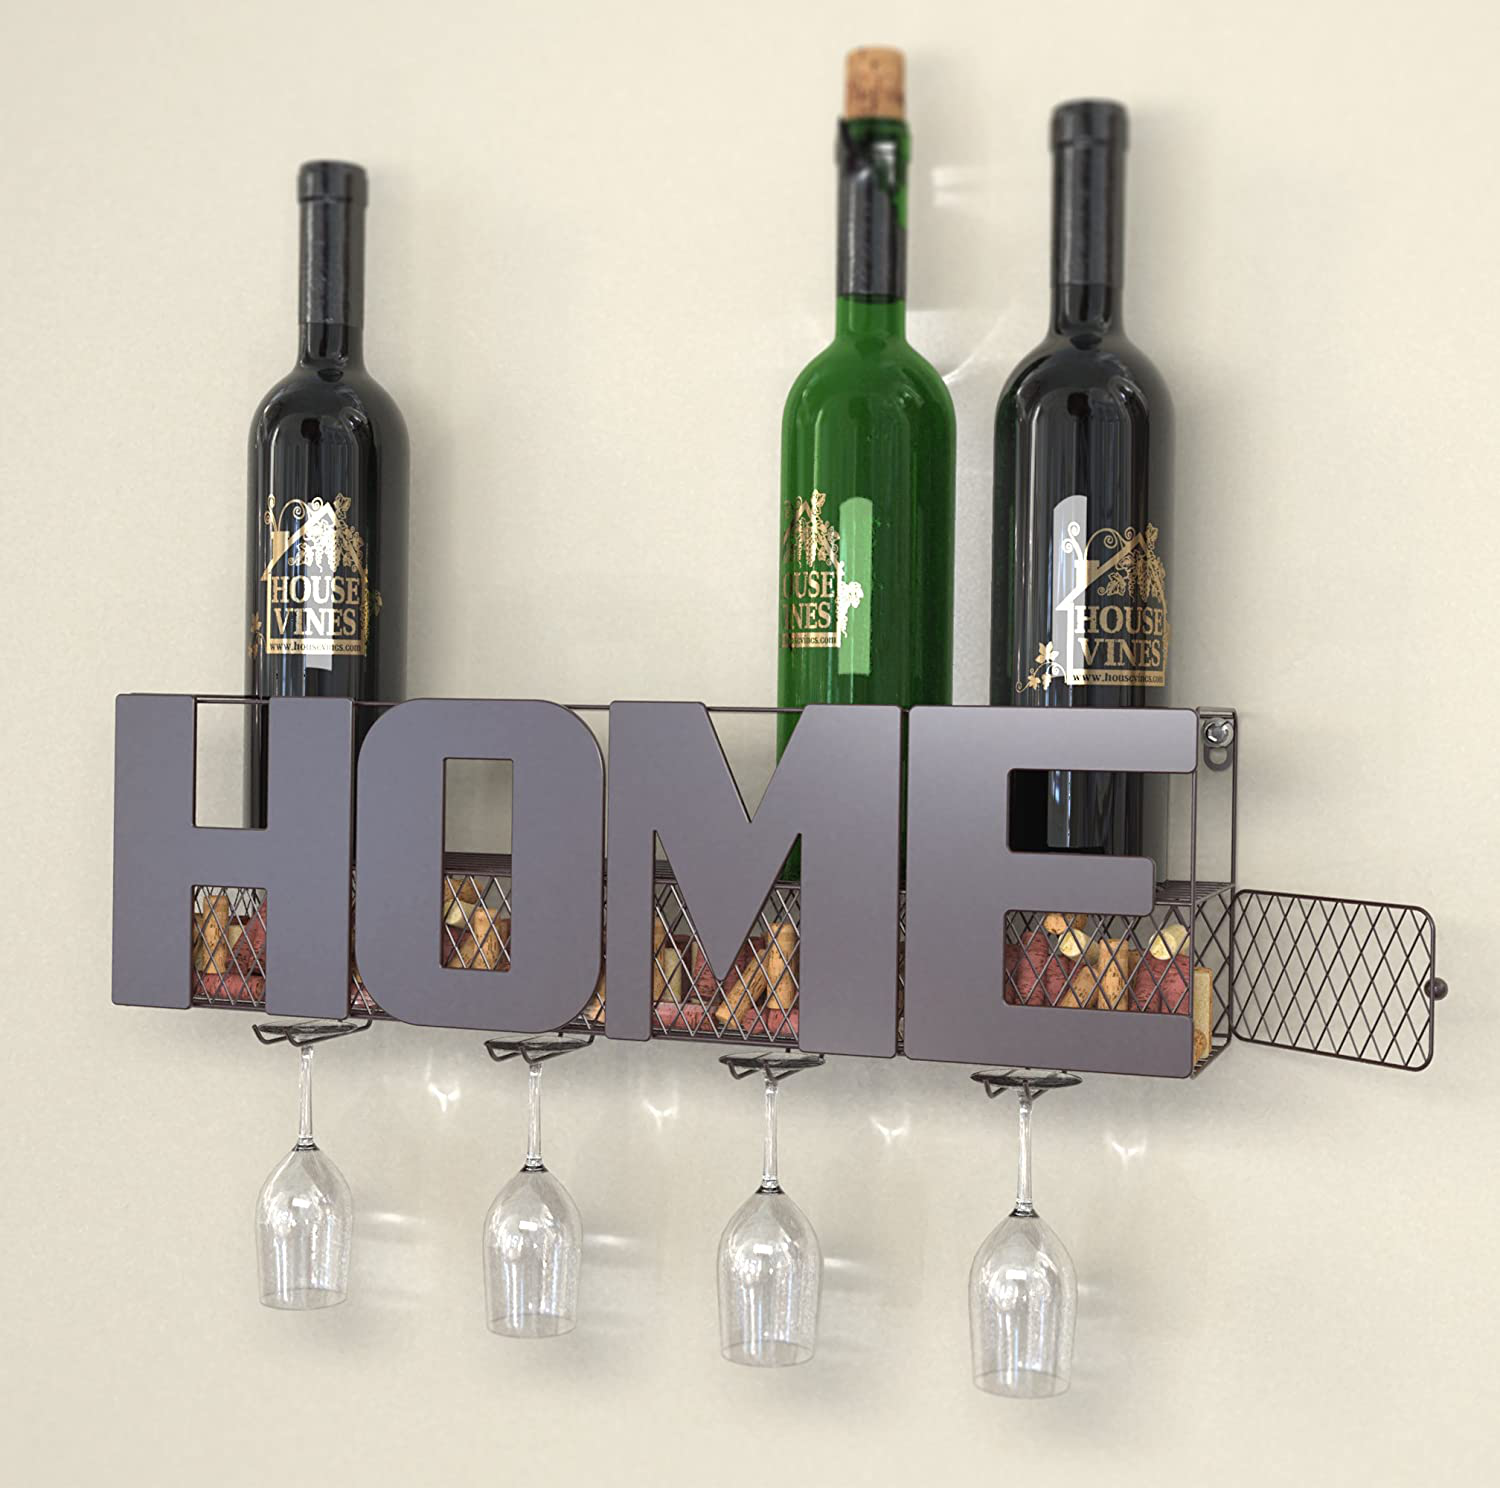 https://www.ekrhome.com/home-wall-mounted-metal-wine-rack-with-4-long-stem-glass-holder-wine-cork-storage-gifts-for-wine-lovers-product/